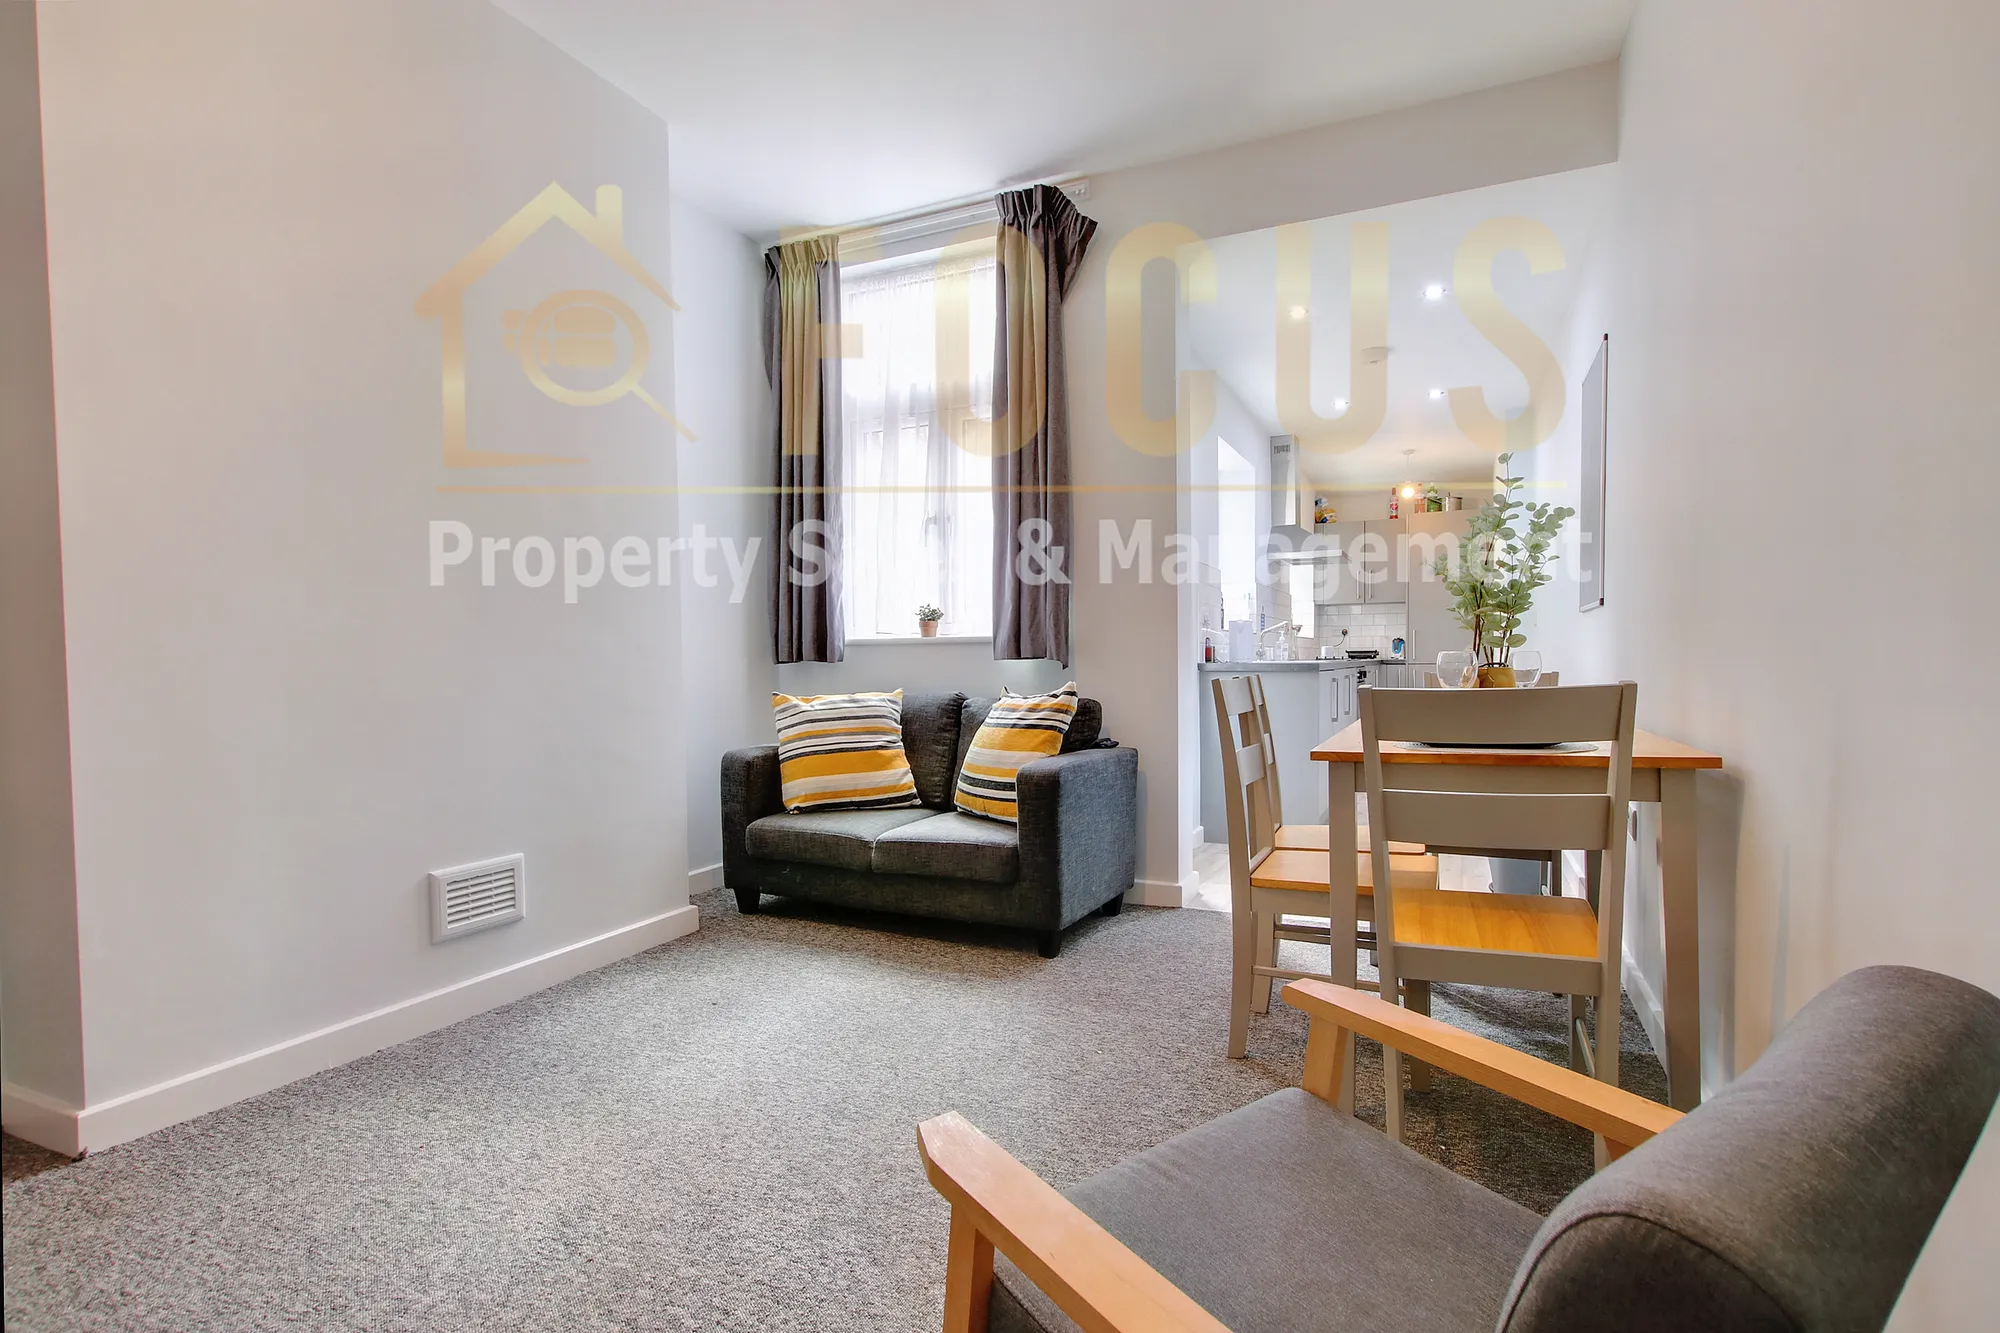 3 bed terraced house to rent in St. Leonards Road, Leicester - Property Image 1